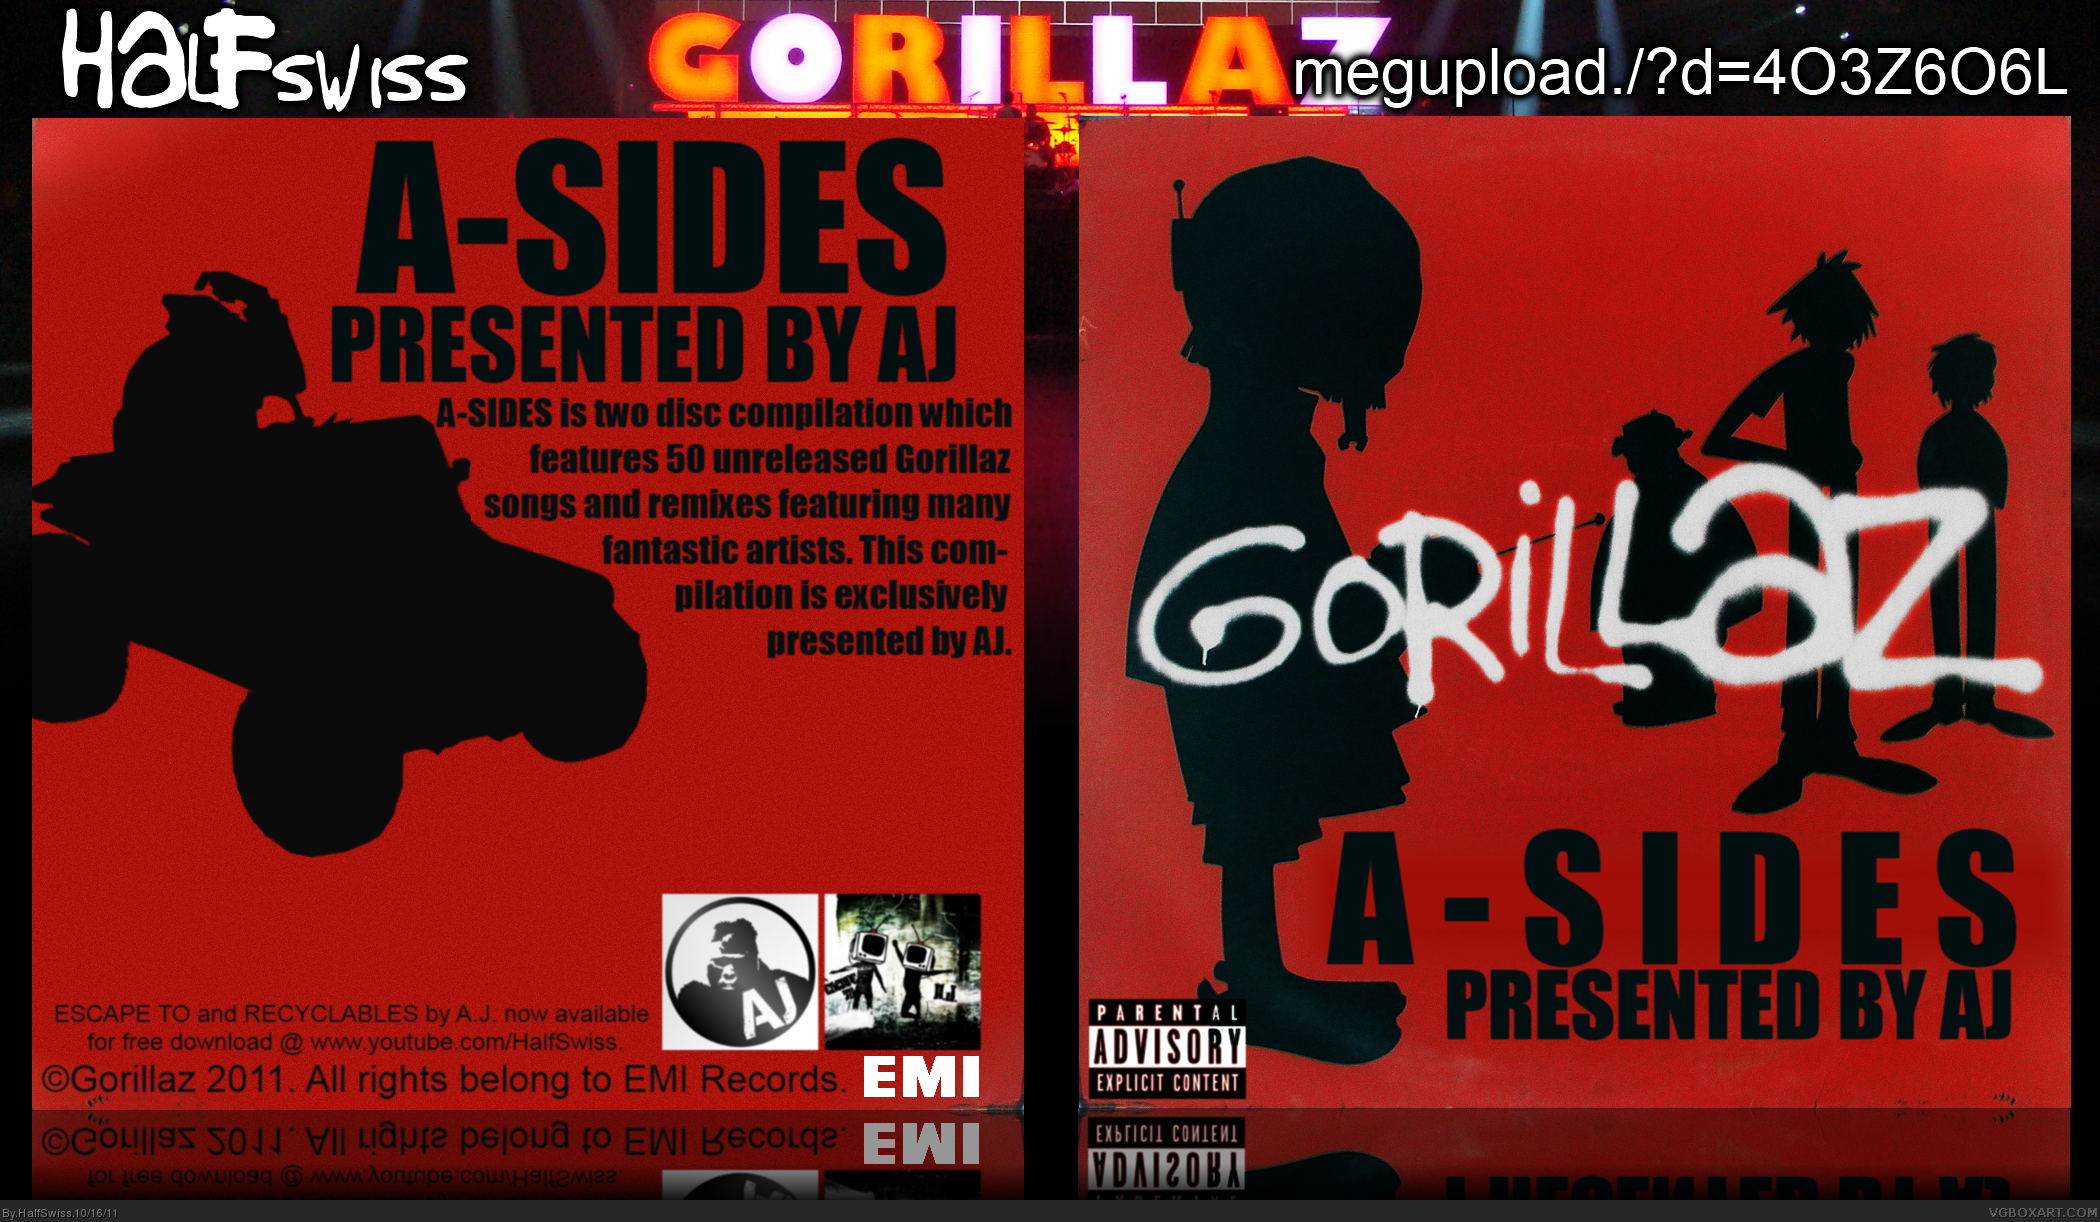 Gorillaz: A-SIDES Presented by A.J. box cover